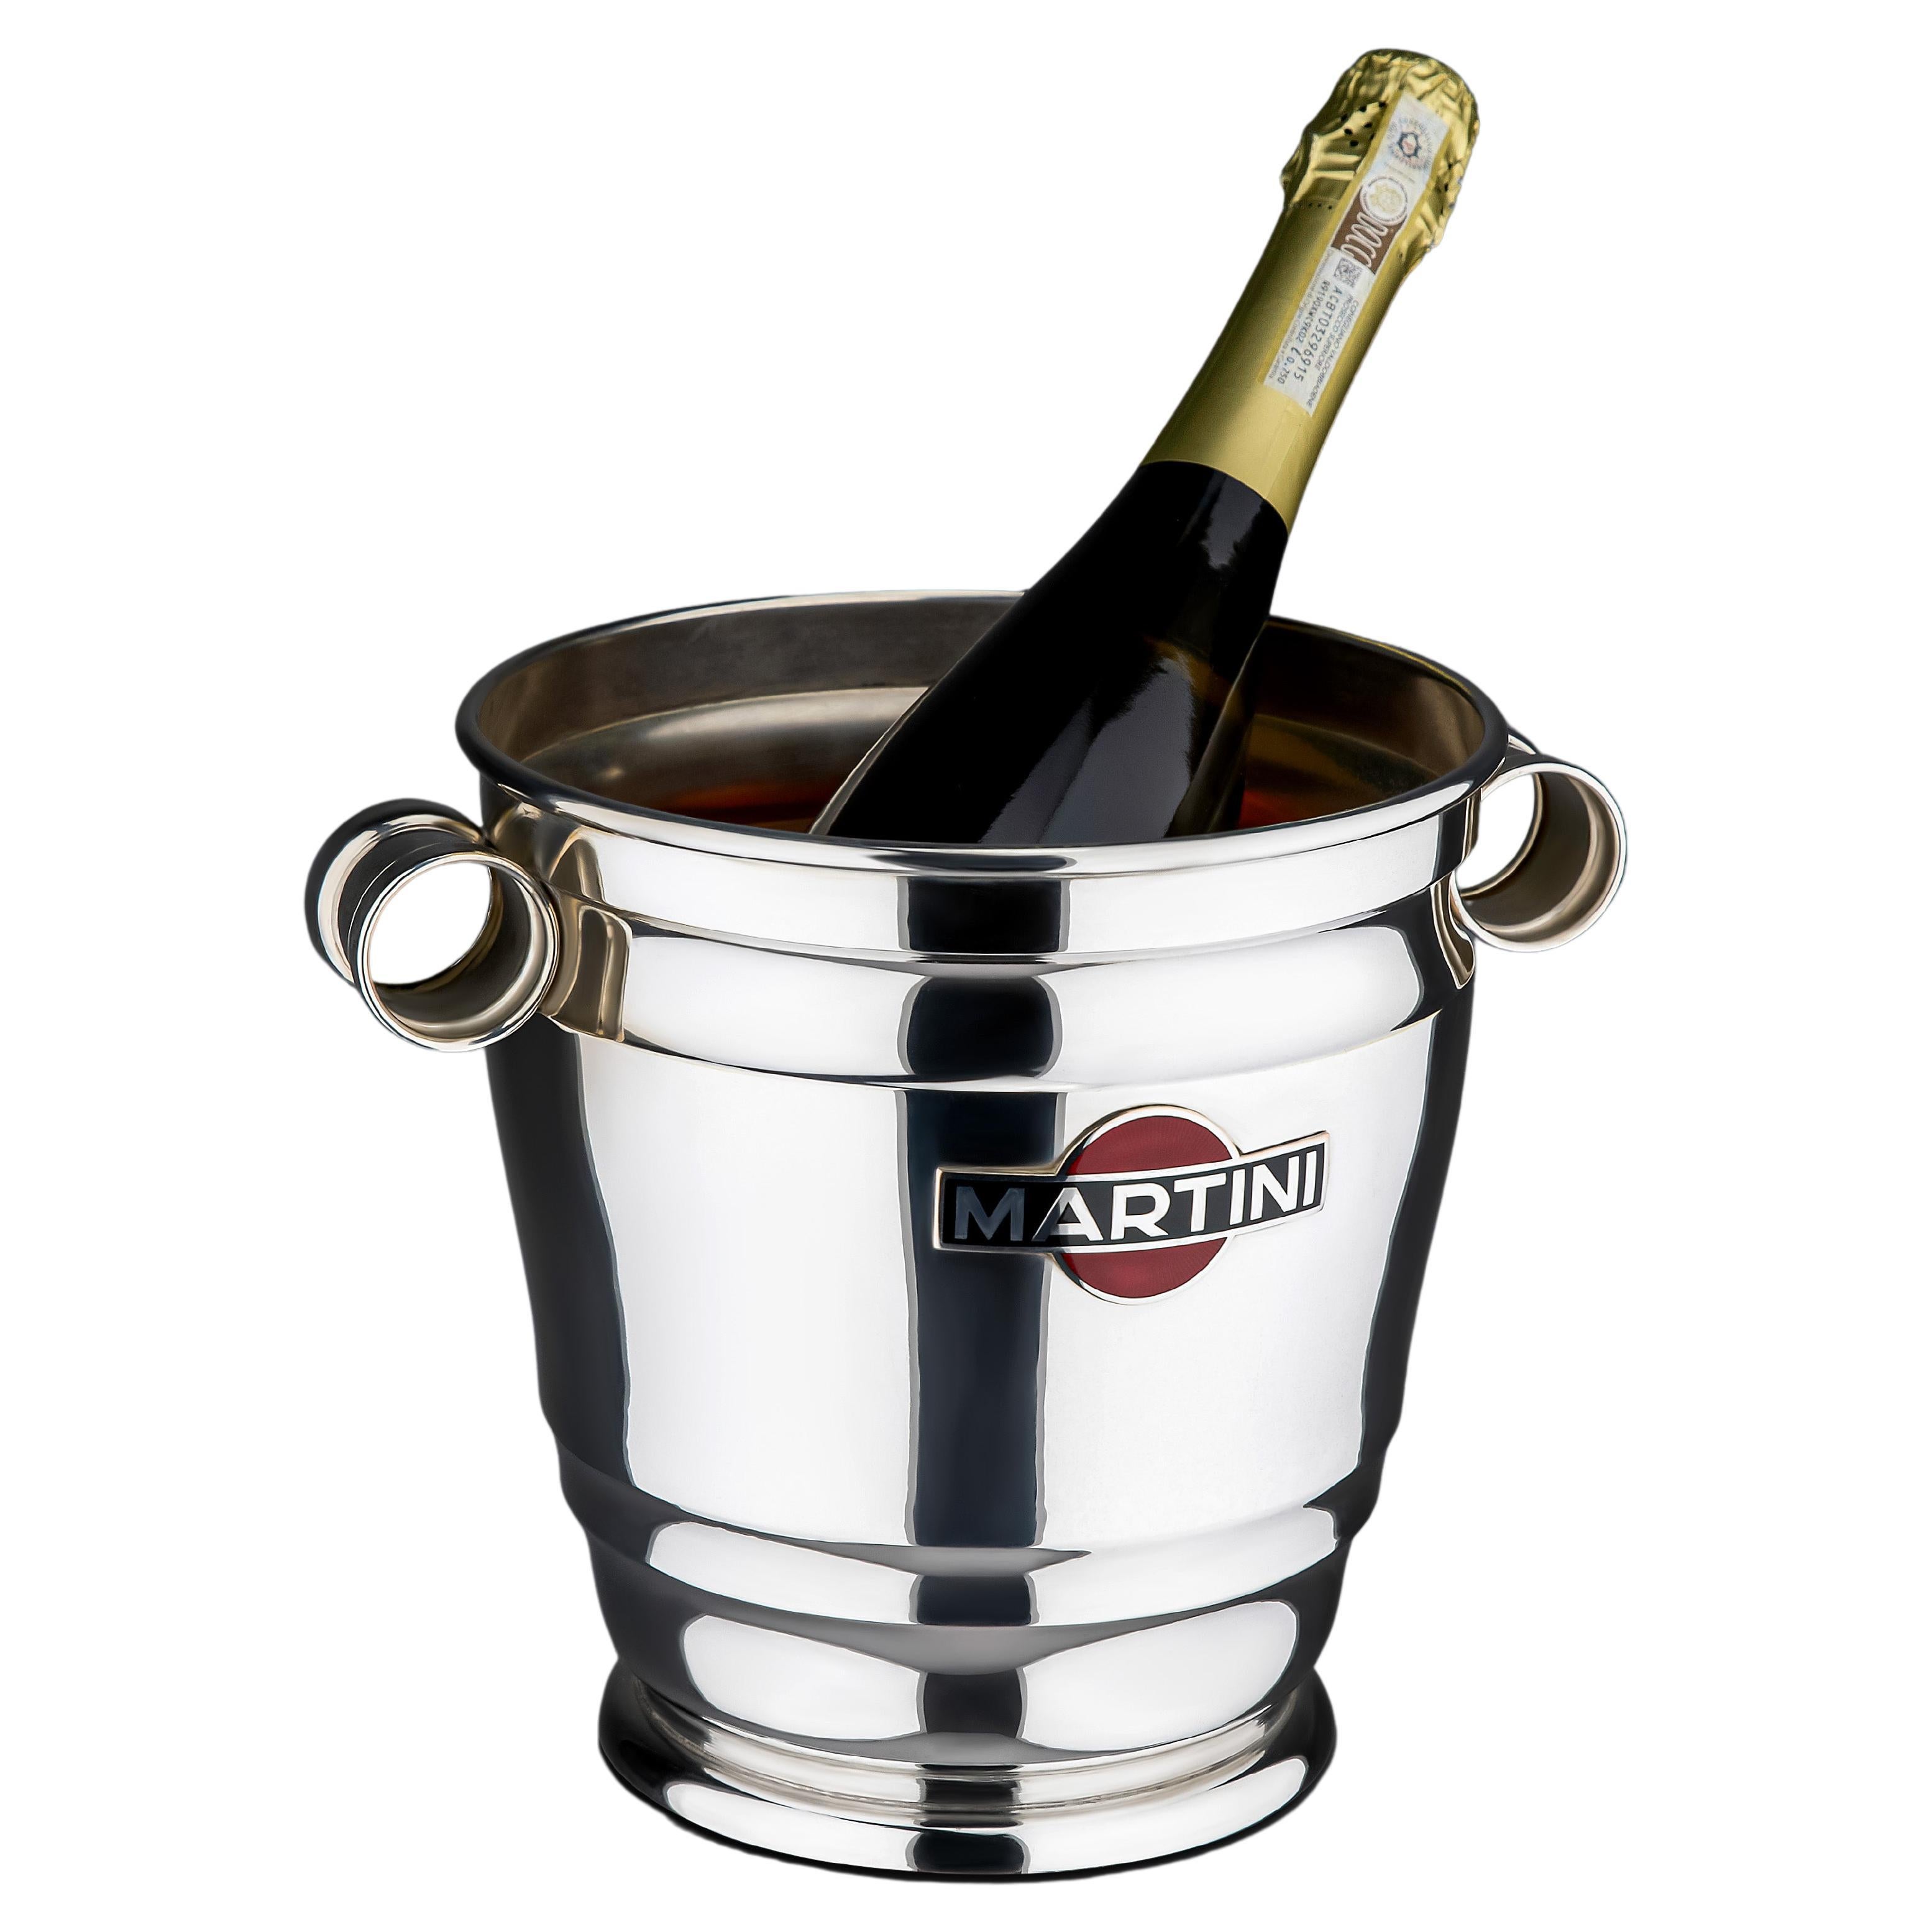 Martini Silver Plated and Enamel Champagne Cooler 19609 For Sale